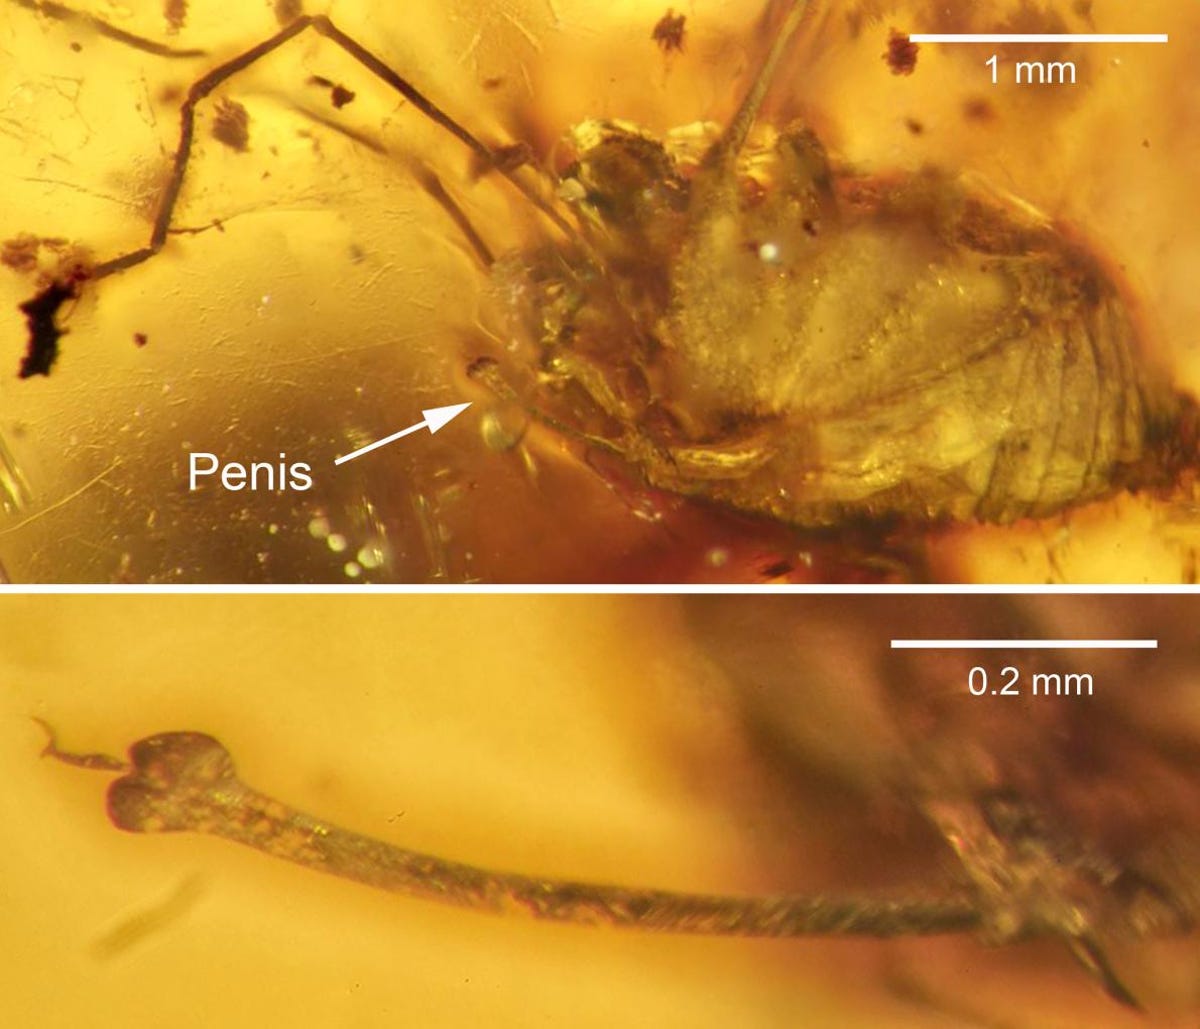 Detailed view of erection below image of a spider, all in hues of orange.